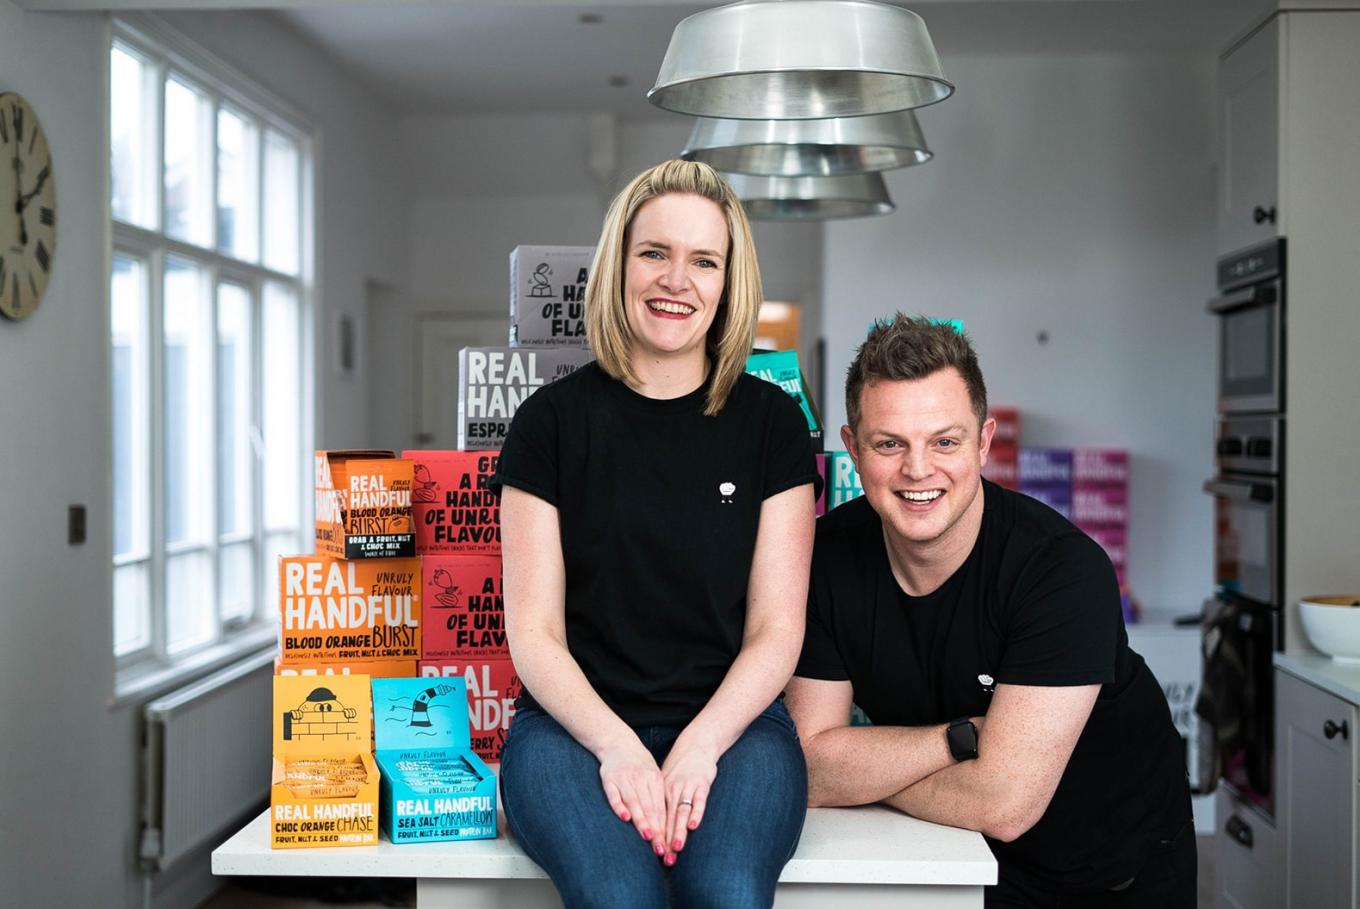 A man and woman from Real Handful with a table full of their healthy snacking products